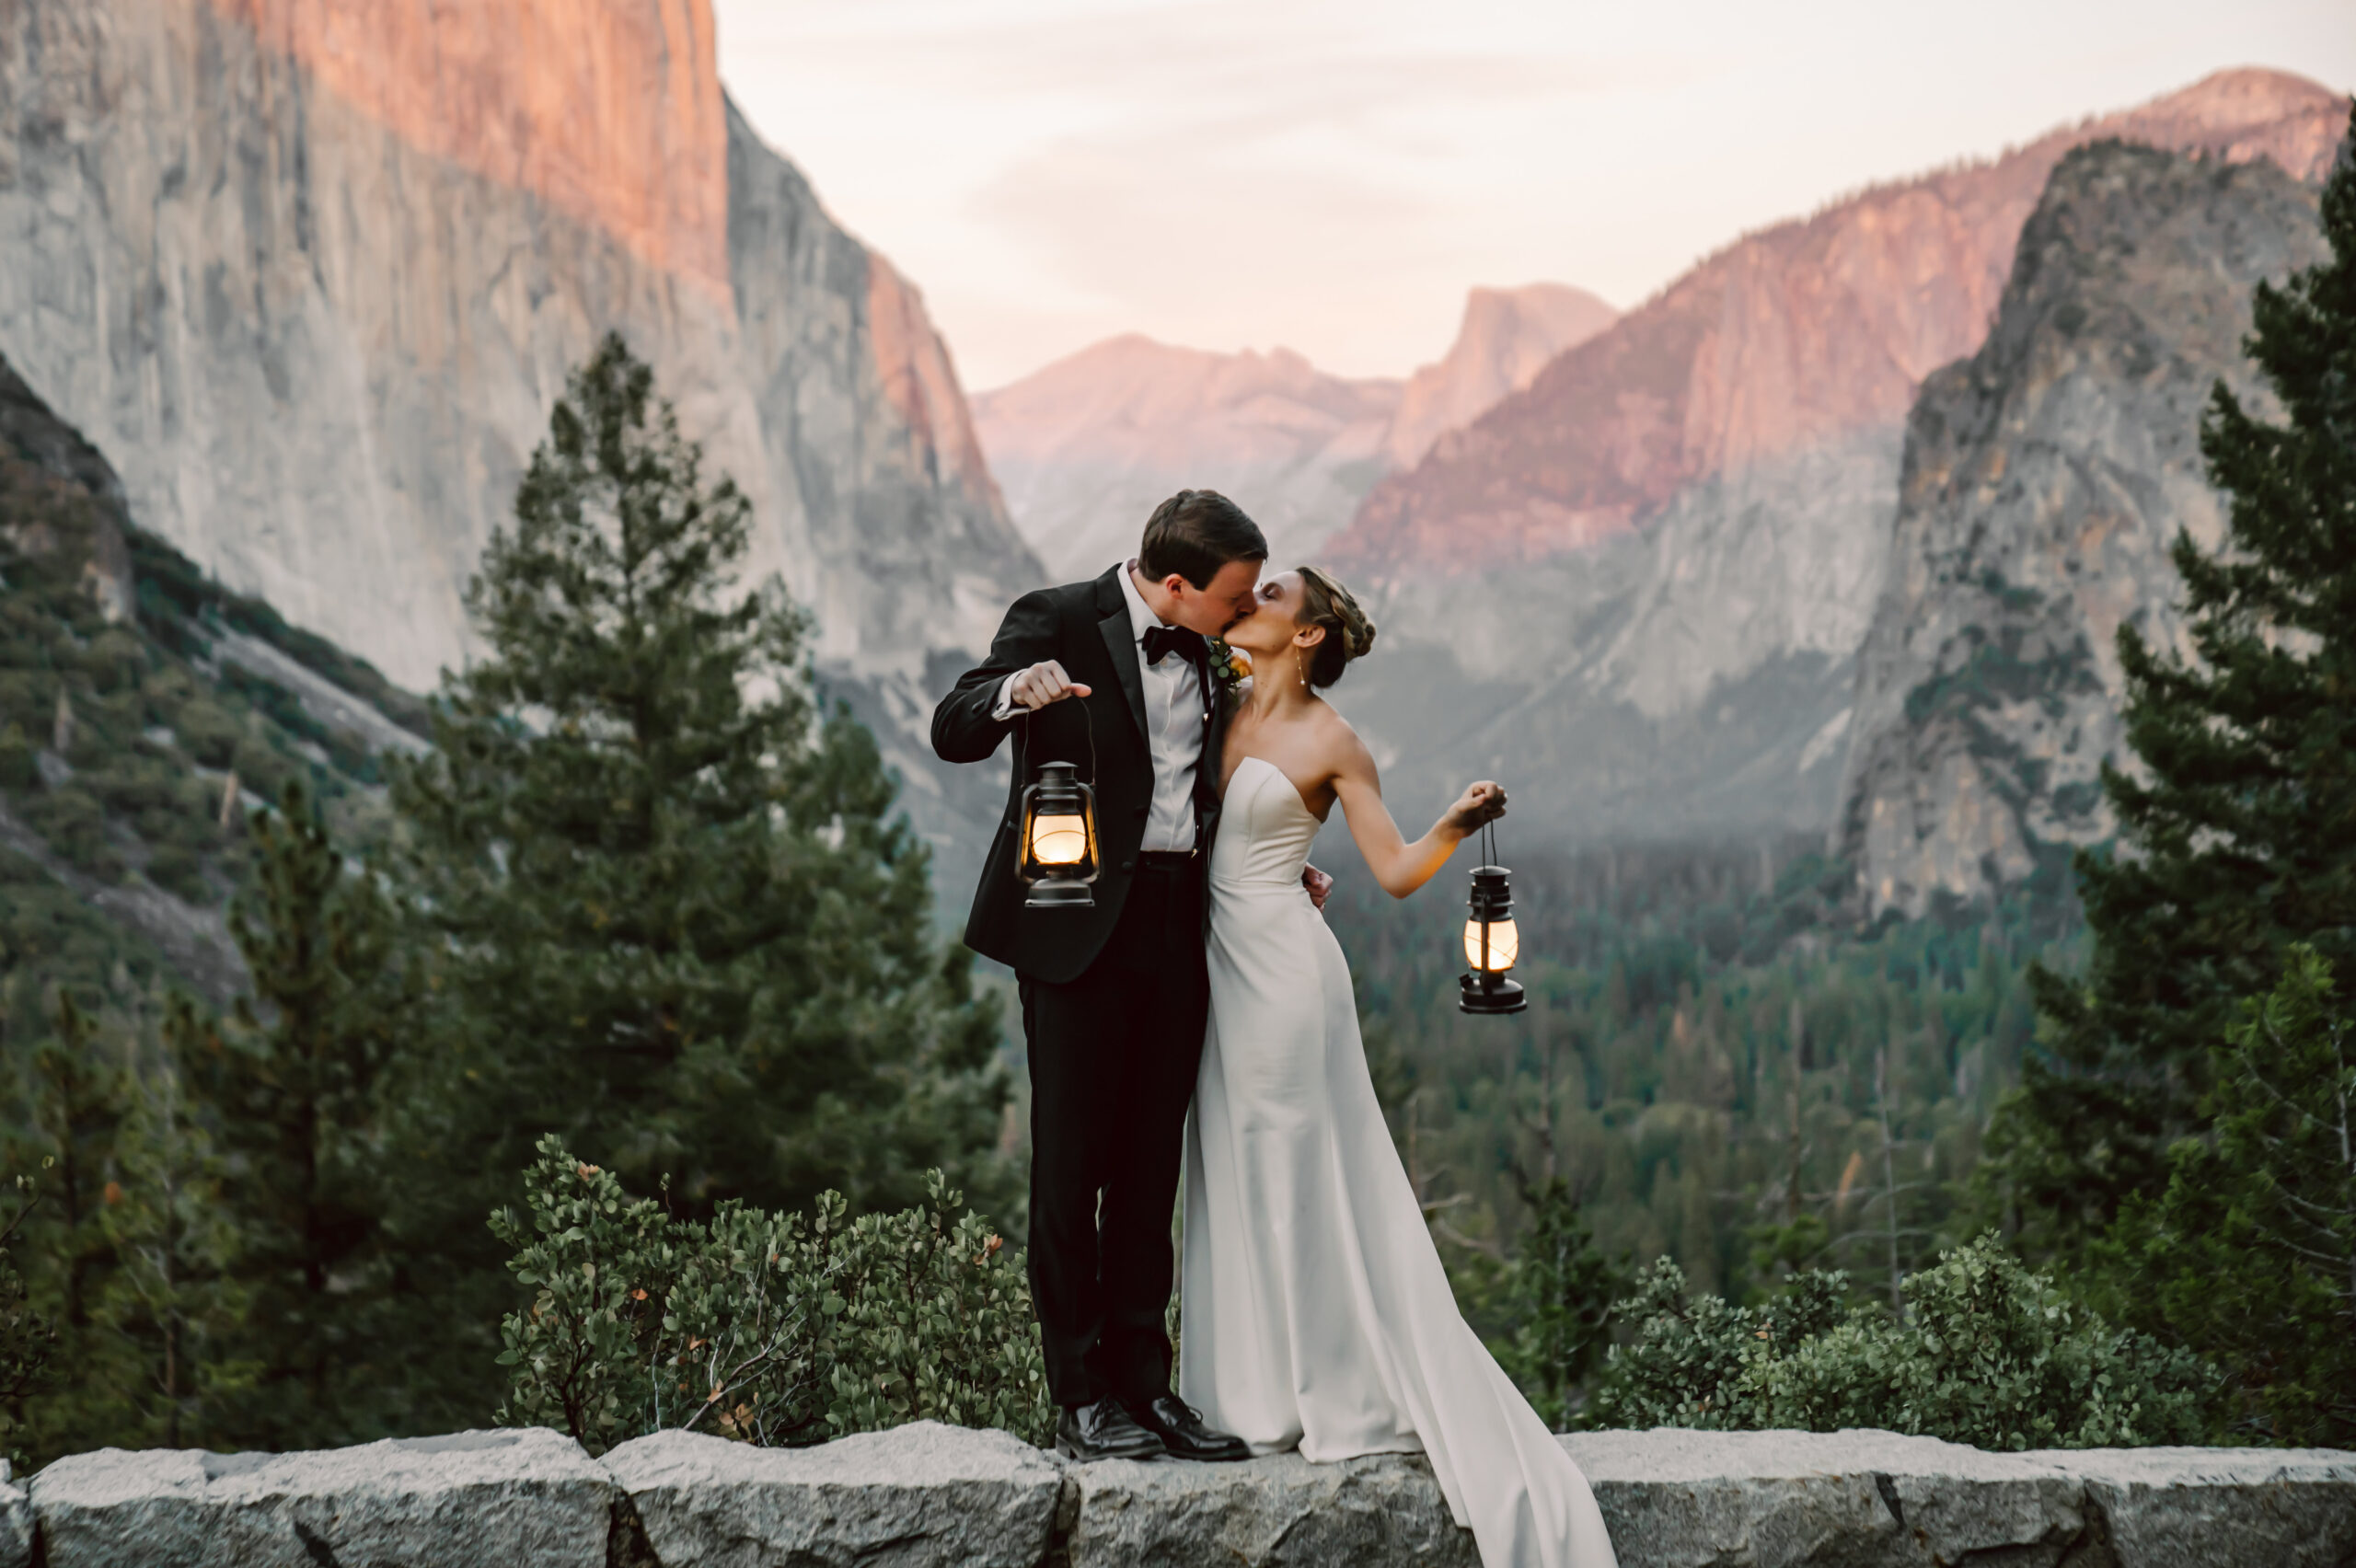 A bride and groom kissing and holding lanterns in front of the sunset at Yosemite Valley for their elopement day